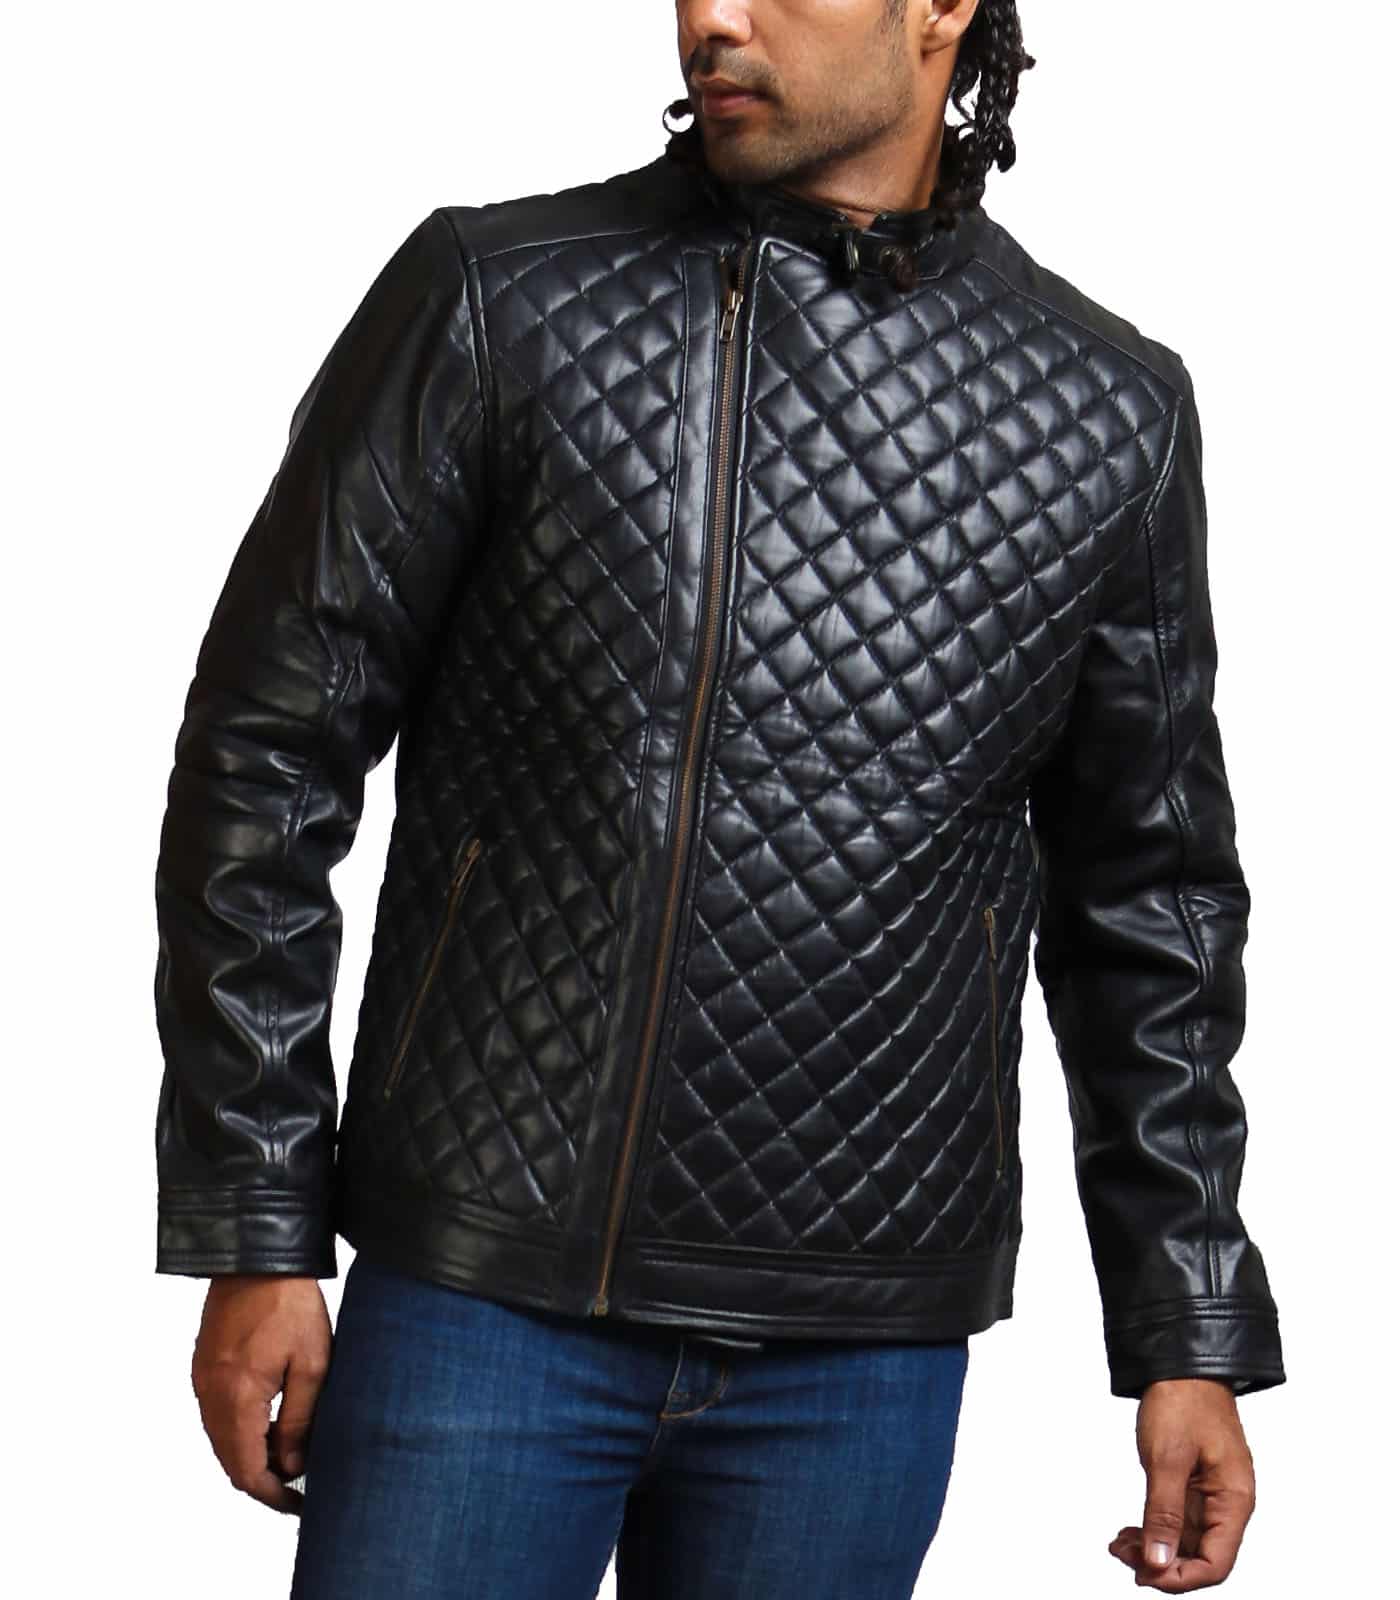 Buy Diamond Quilted Black Fashion Jacket for Men | USA Leather Factory